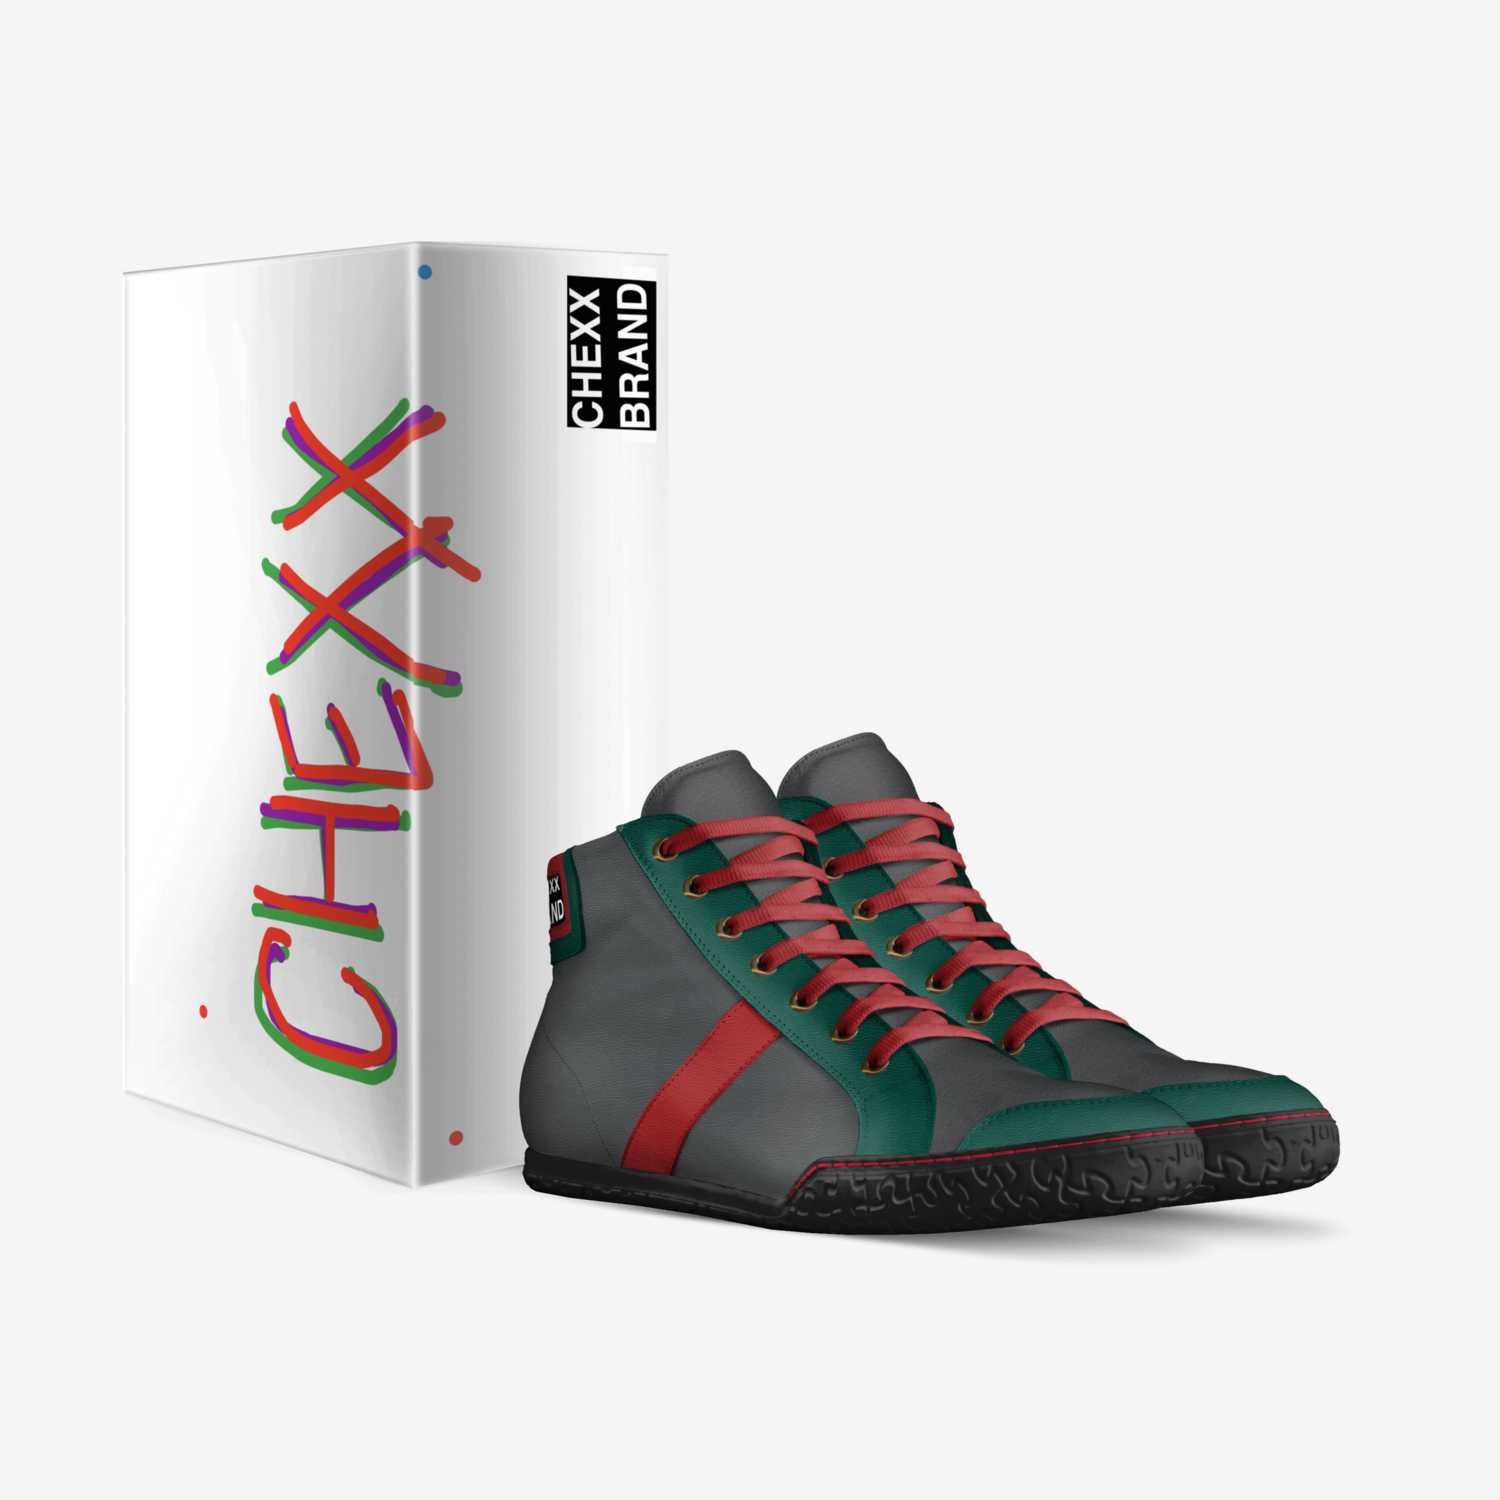 Chexx1 custom made in Italy shoes by Jeremy Walker | Box view